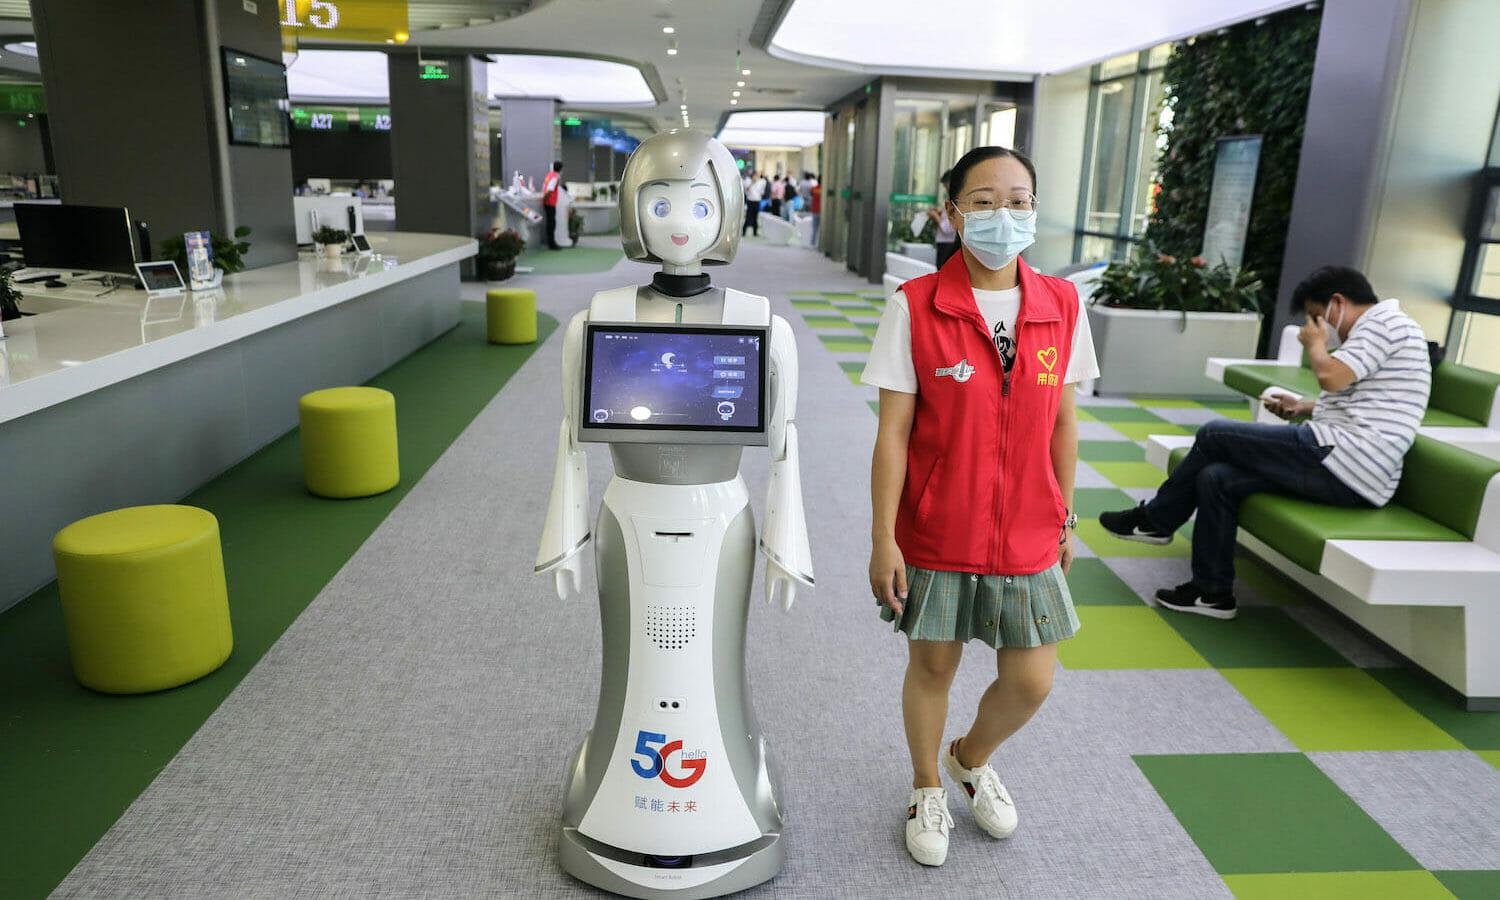 A 5G-supported intelligent robot works at the administration service centre on August 14, 2020 in Zhoushan, Zhejiang Province of China. China announced a new global data security program, which seemed tat least in part  to be in response to restrictions or outright banning by Western allies of the use of Chinese telecommunication equipment manufact...